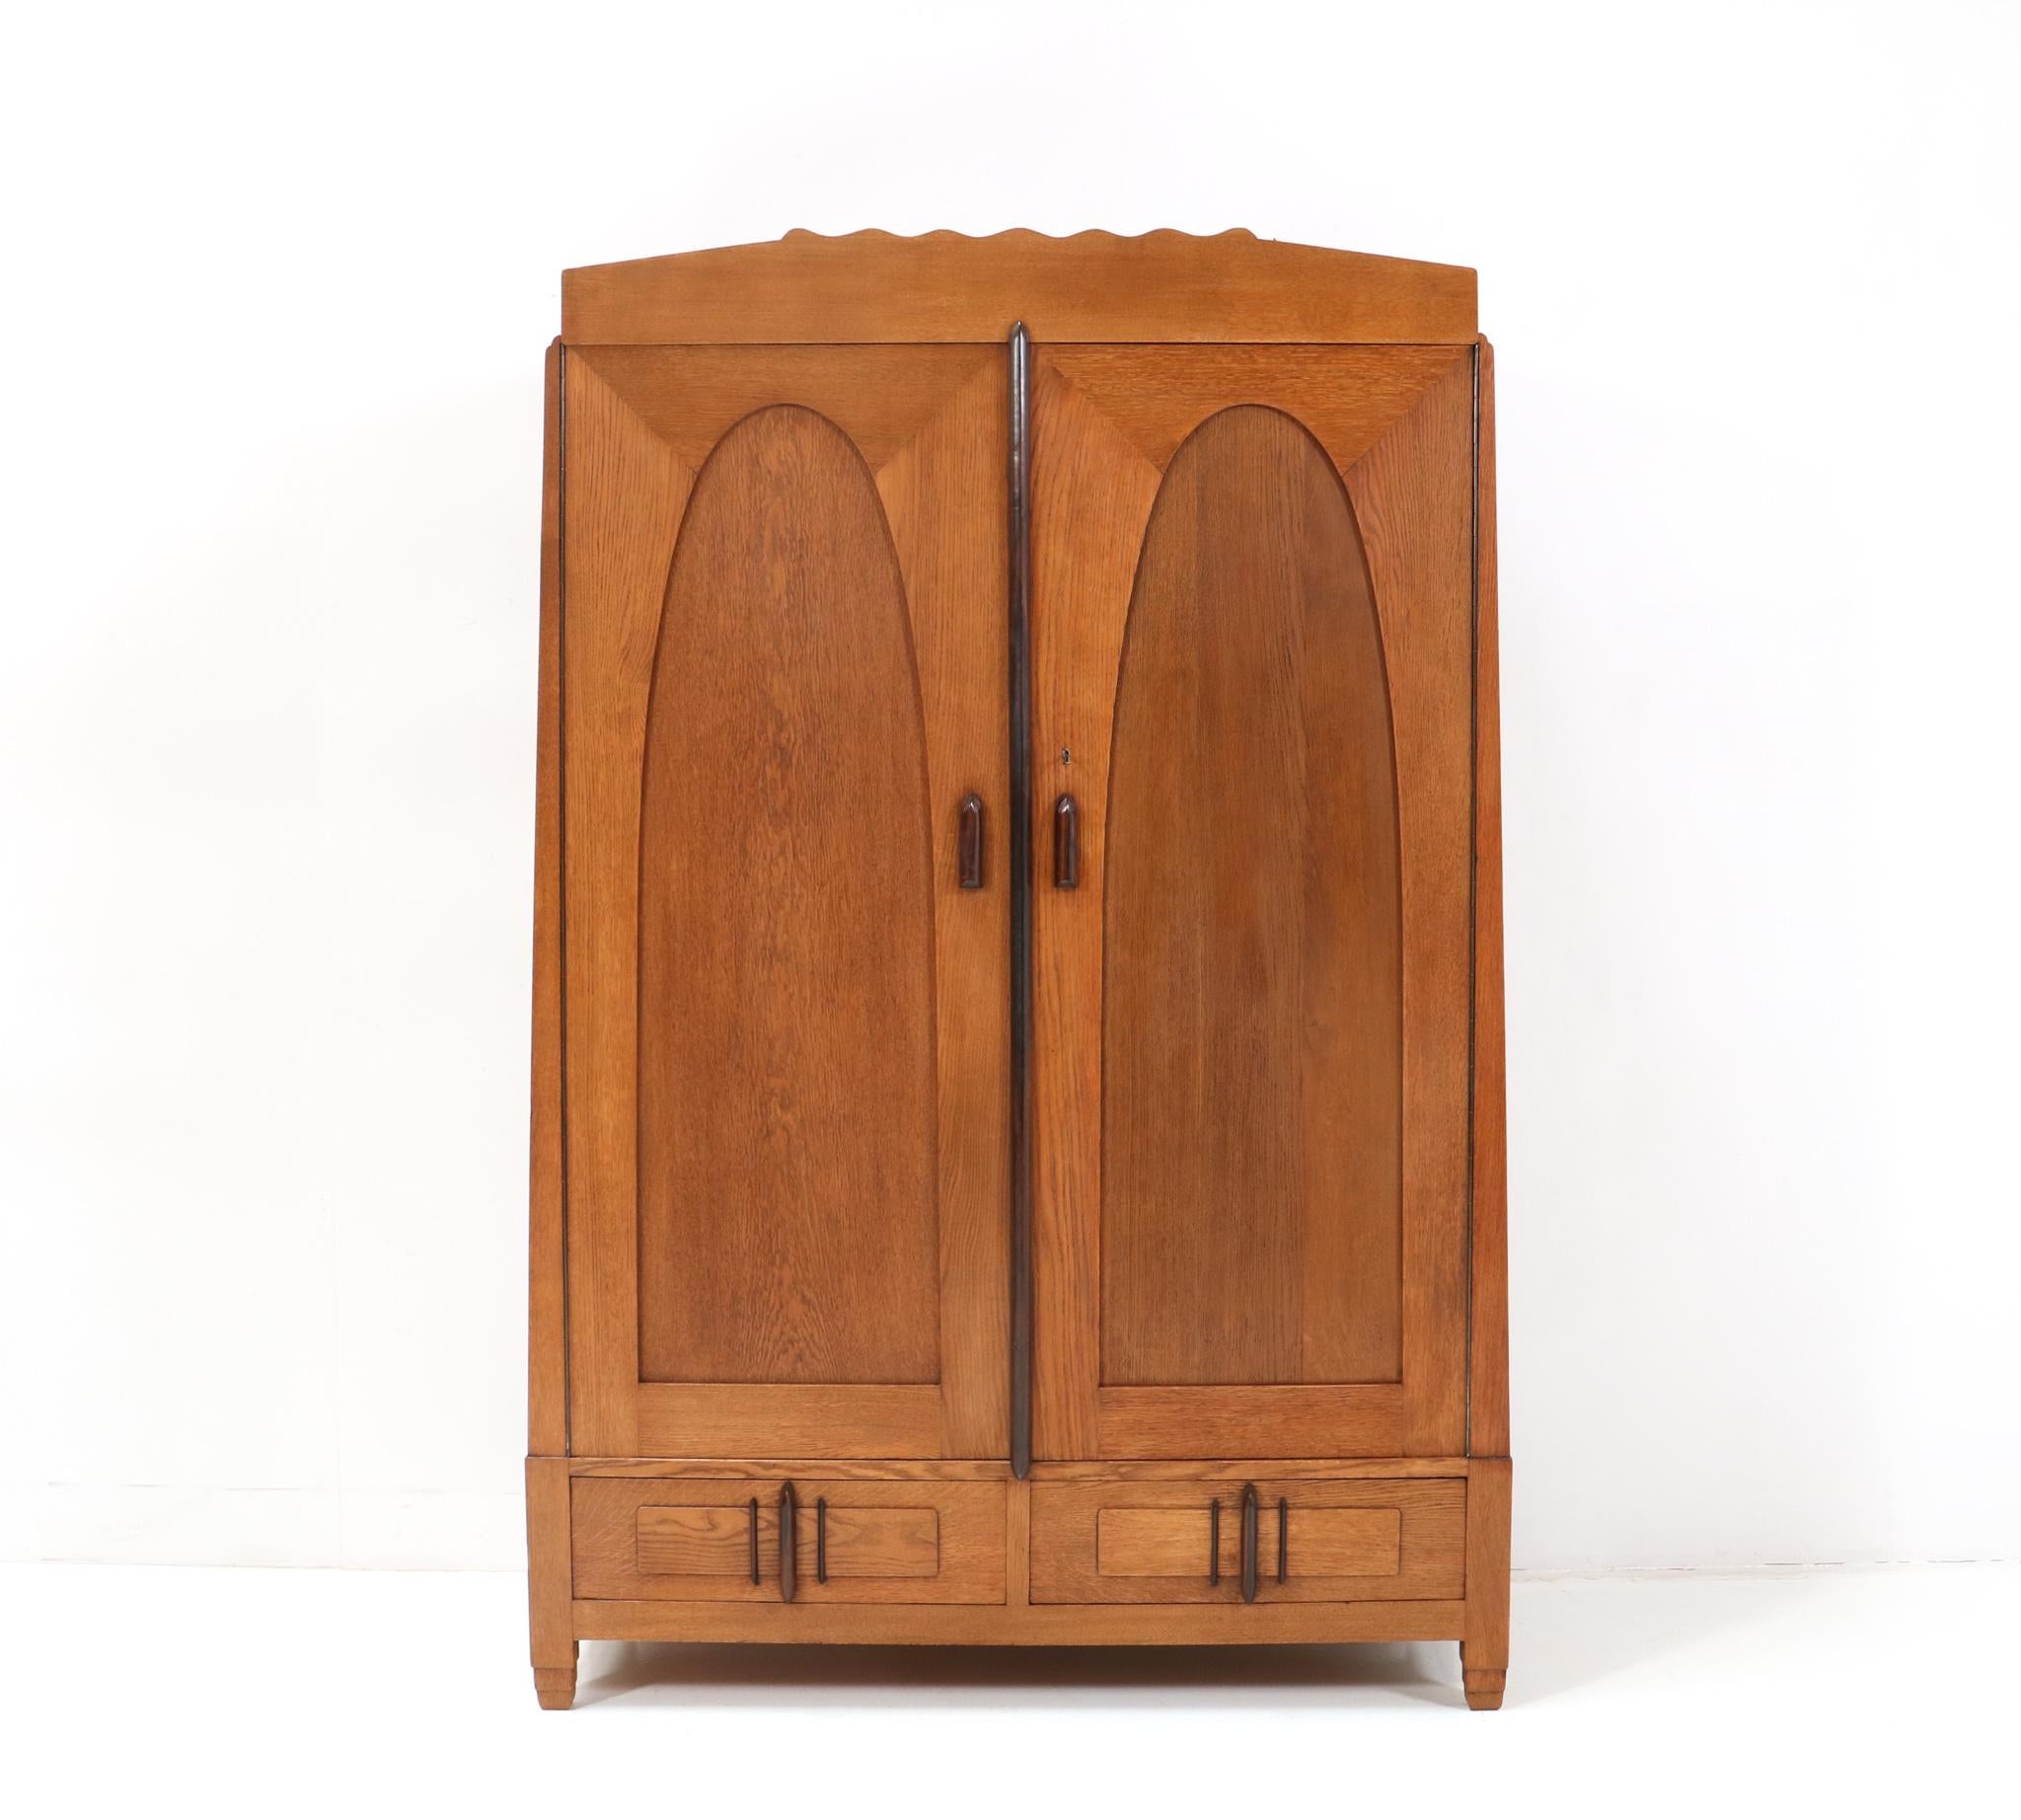 Magnificent and rare Art Deco Amsterdamse School armoire or wardrobe.
Design by J.J. Zijfers Amsterdam.
Striking Dutch design from the 1920s.
Solid oak with original solid macassar ebony elements.
Behind the left door you will find three